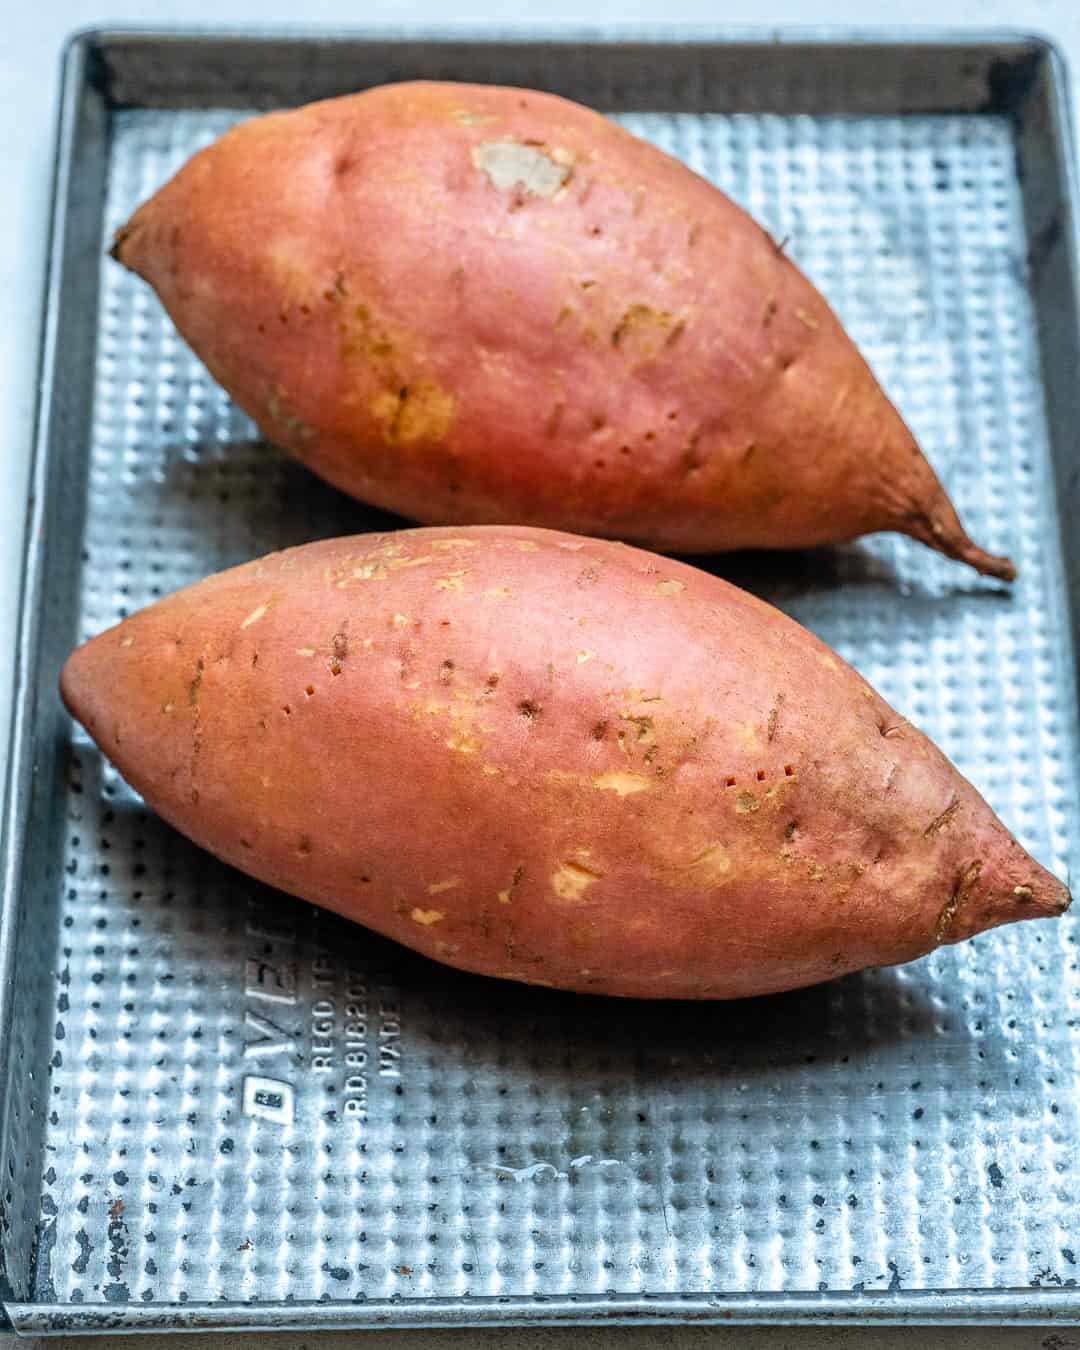 two sweet potatoes on a tray